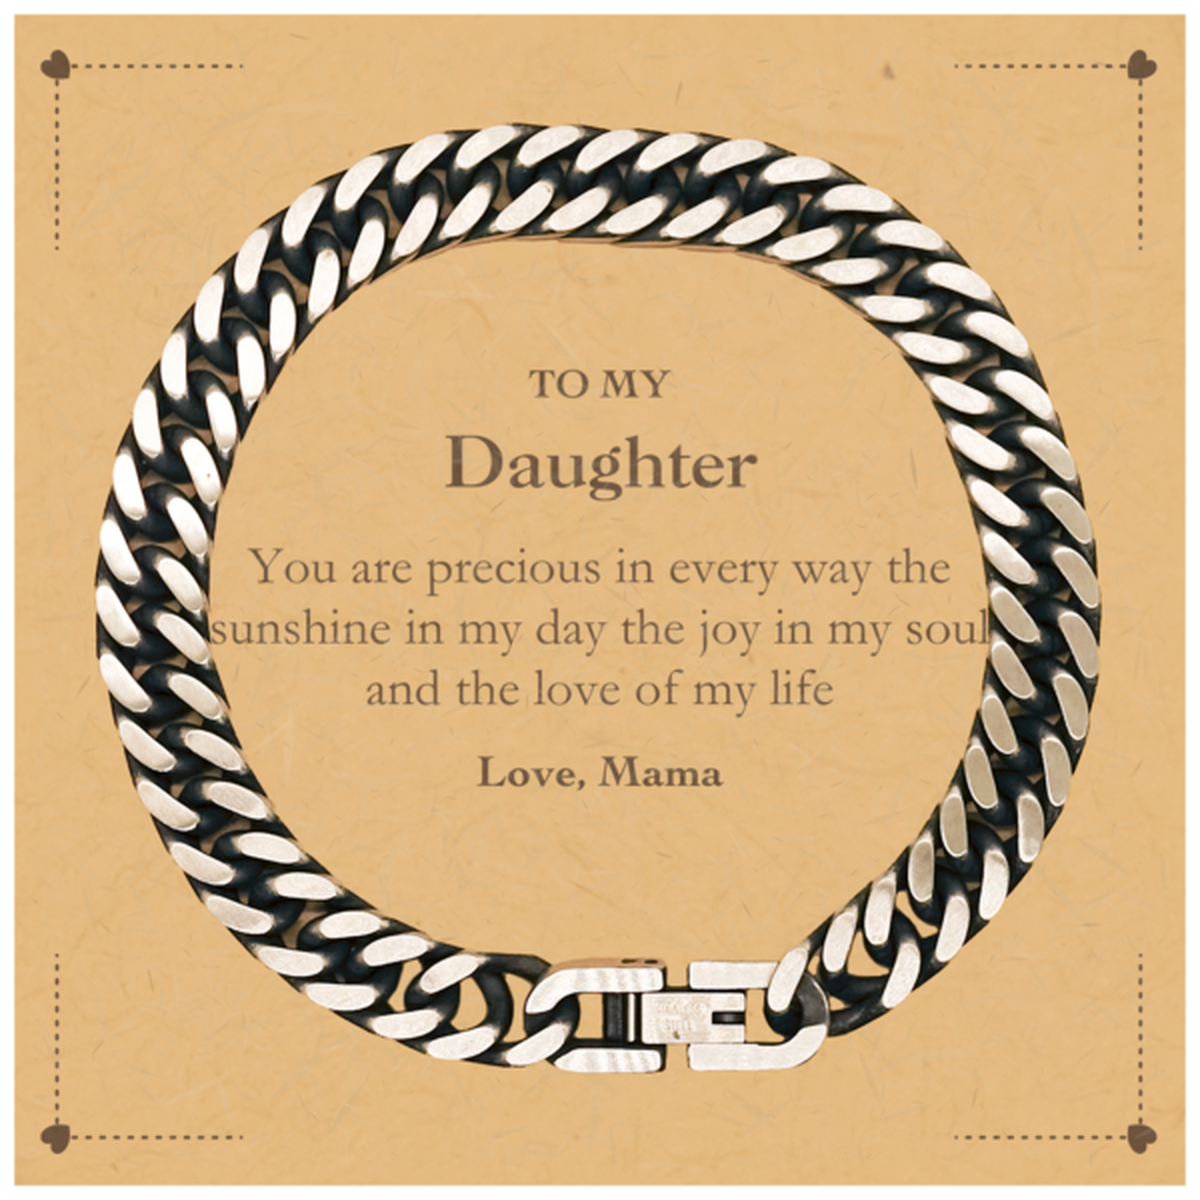 Graduation Gifts for Daughter Cuban Link Chain Bracelet Present from Mama, Christmas Daughter Birthday Gifts Daughter You are precious in every way the sunshine in my day. Love, Mama